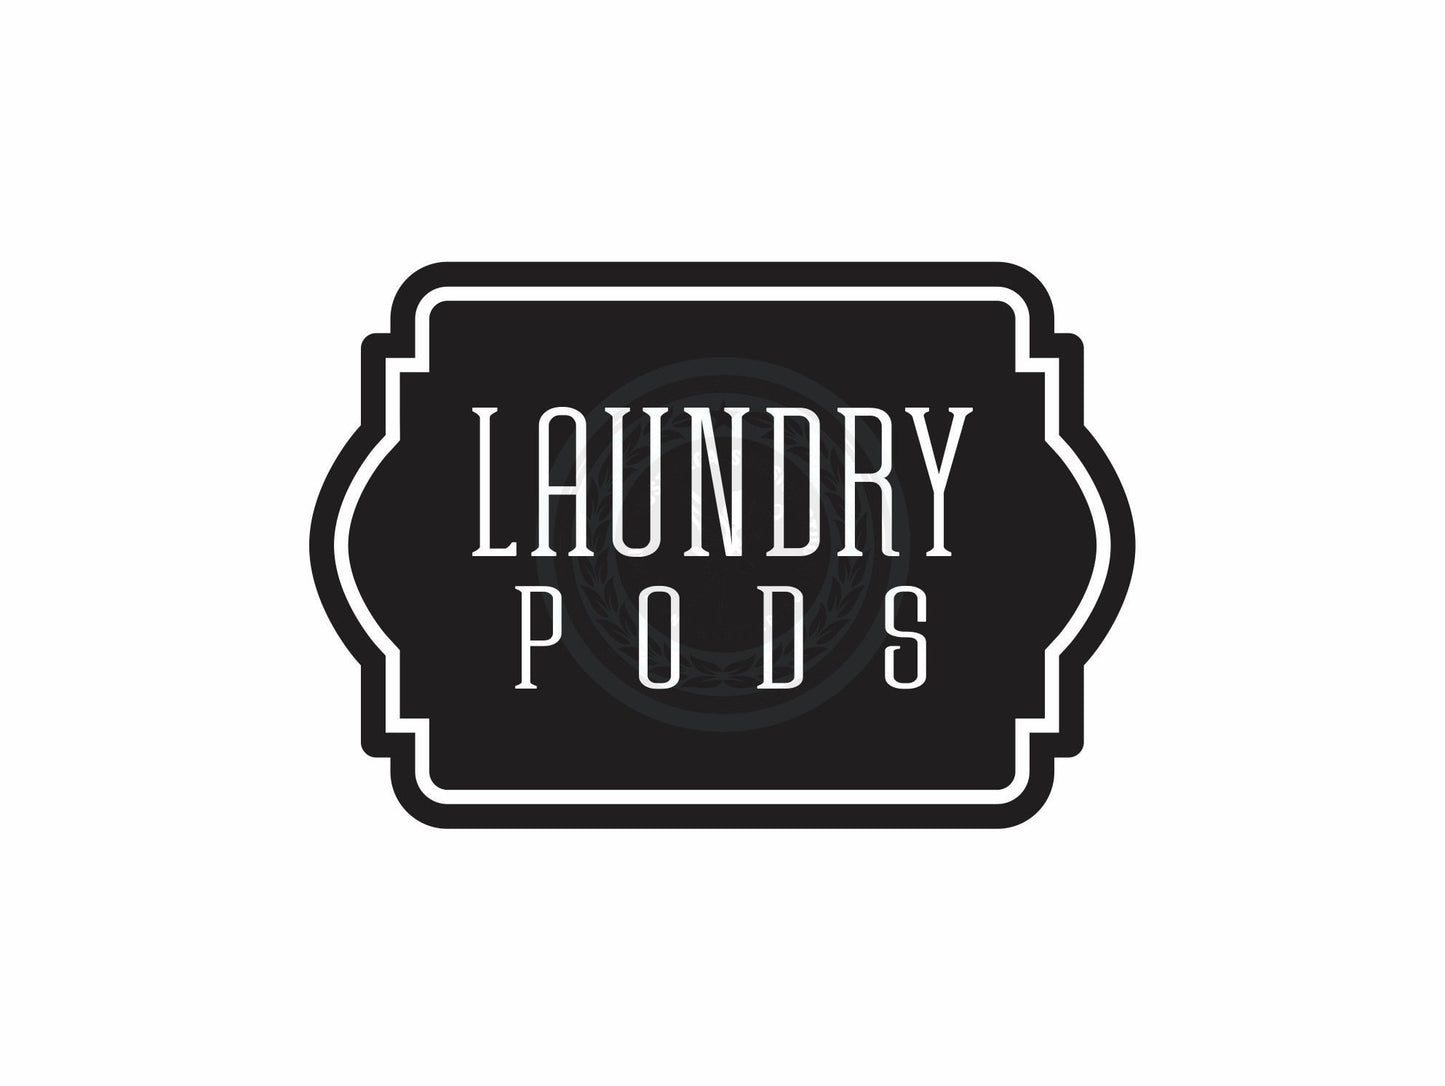 Laundry Pods Decal, organized laundry room, cleaning products labels, container decal for laundry powder soap pods, DECAL ONLY